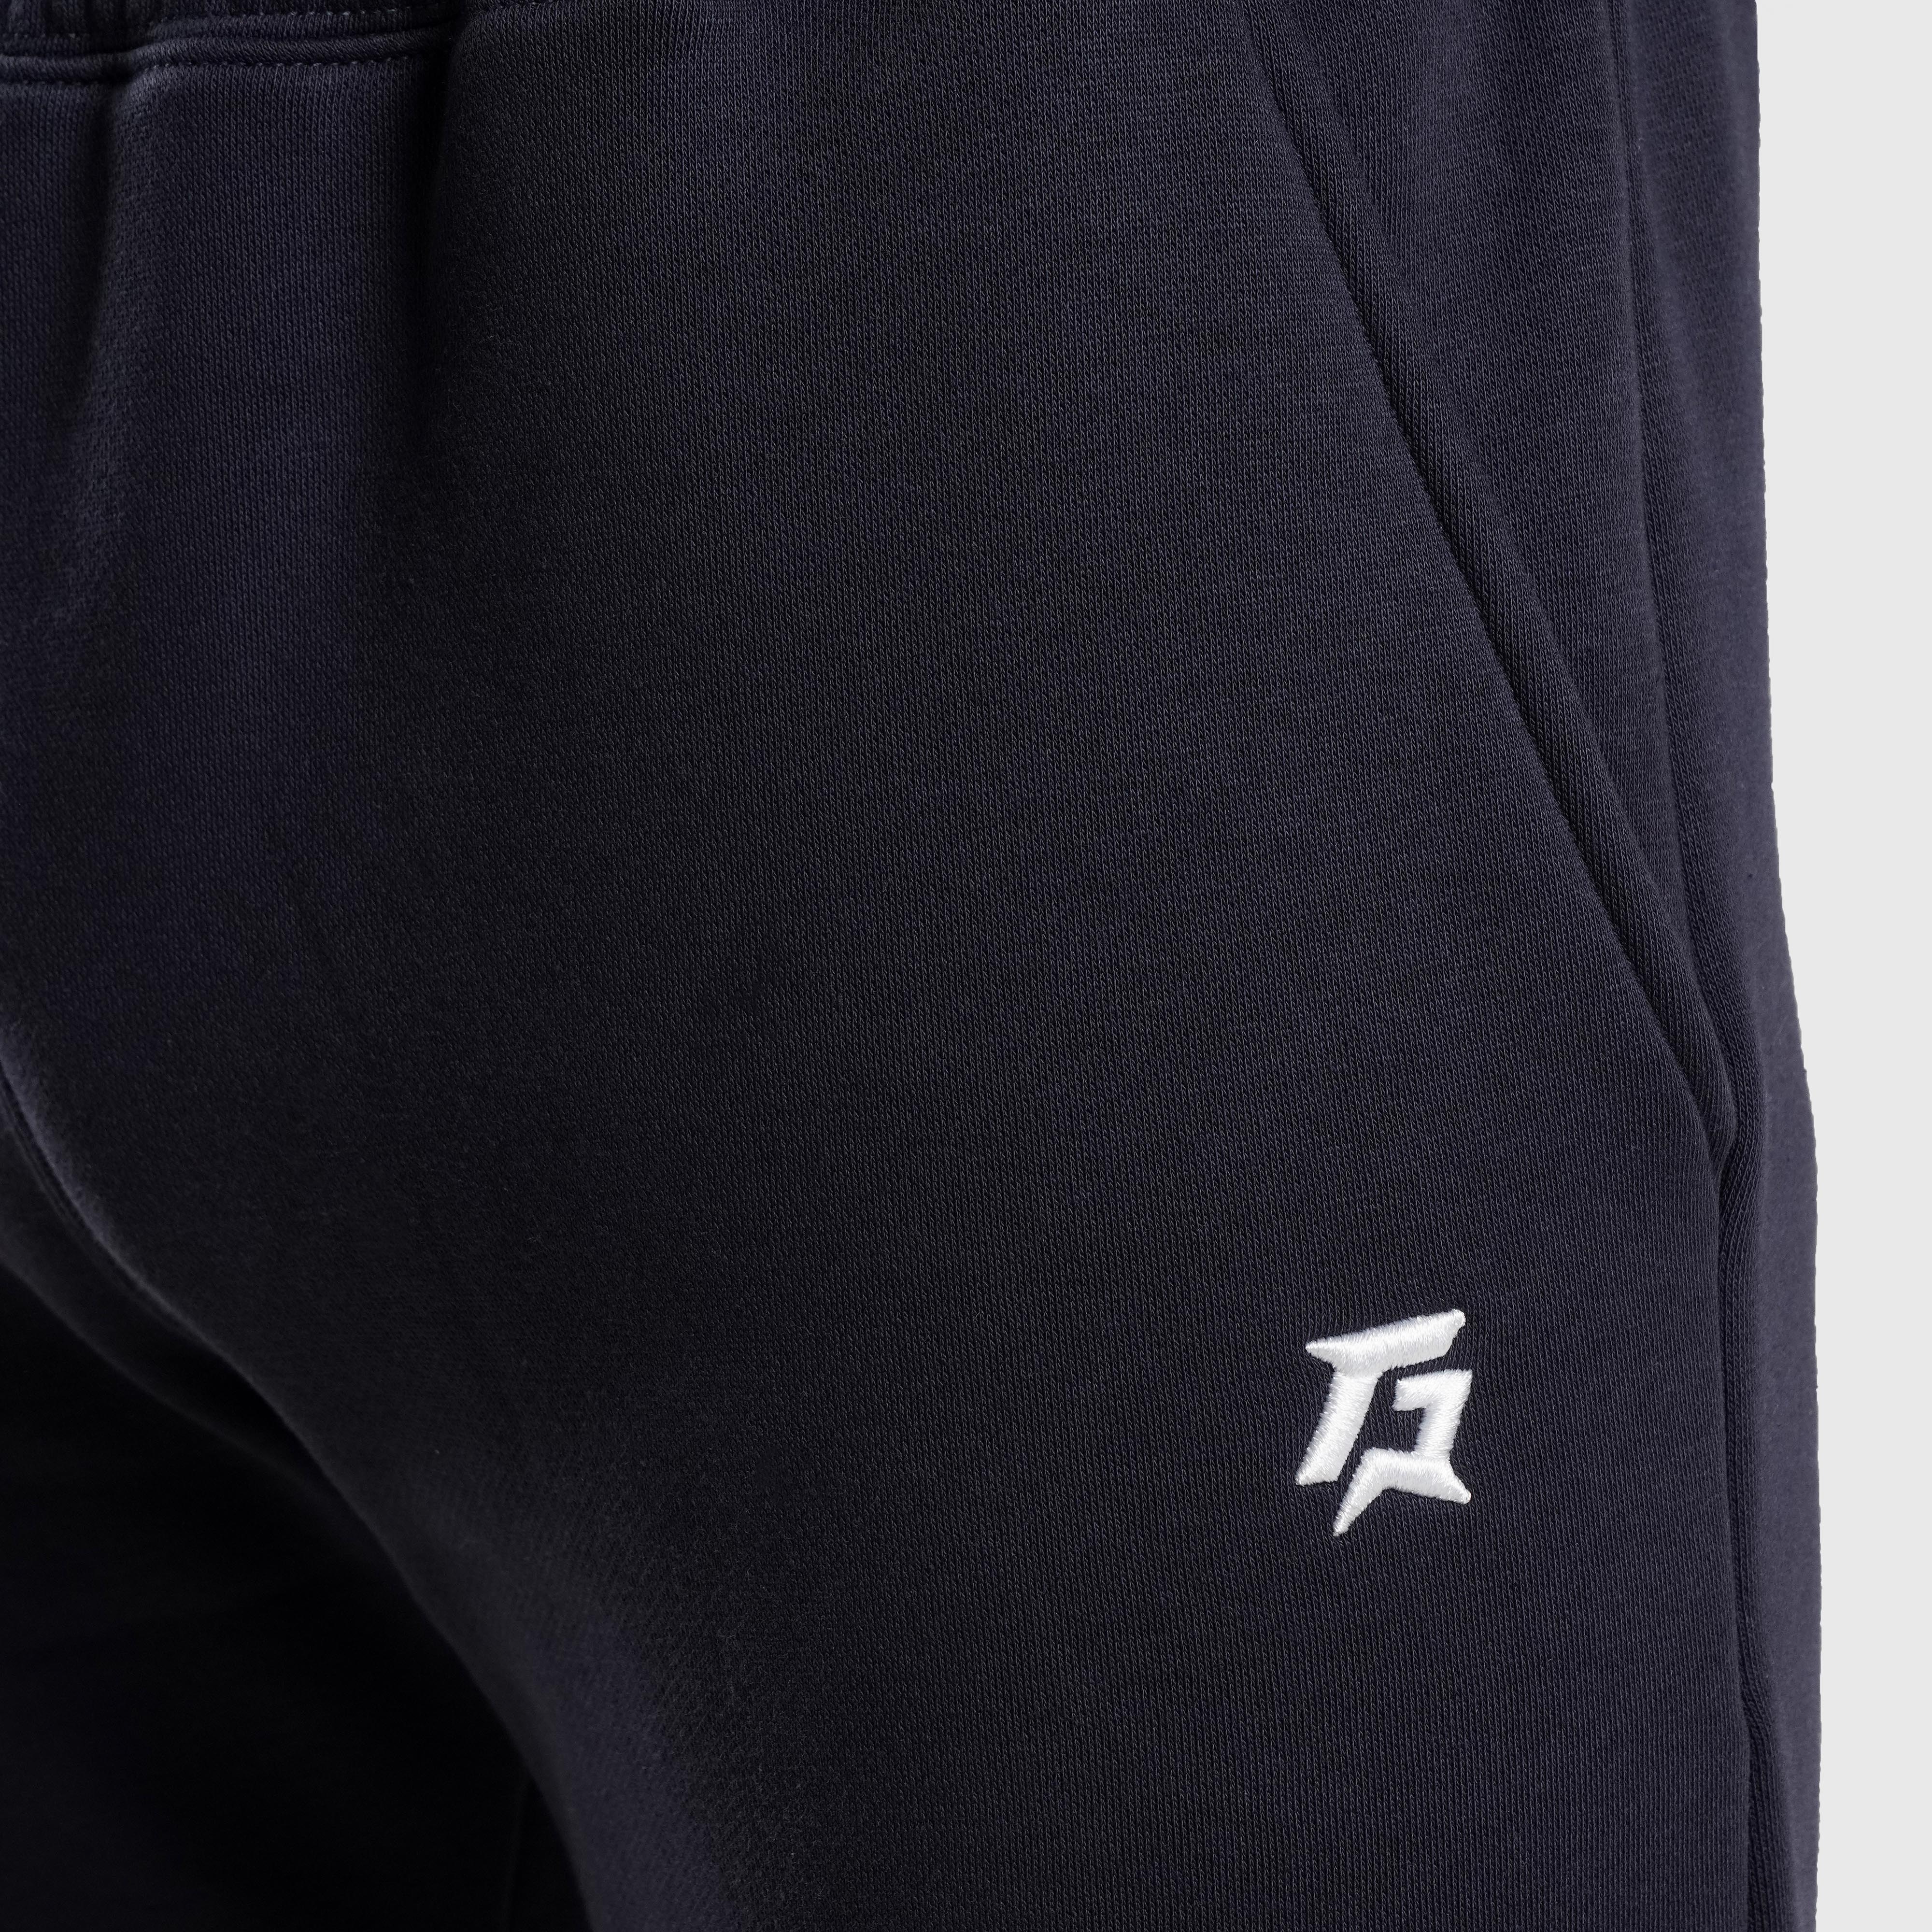 Proto Trousers (Navy)